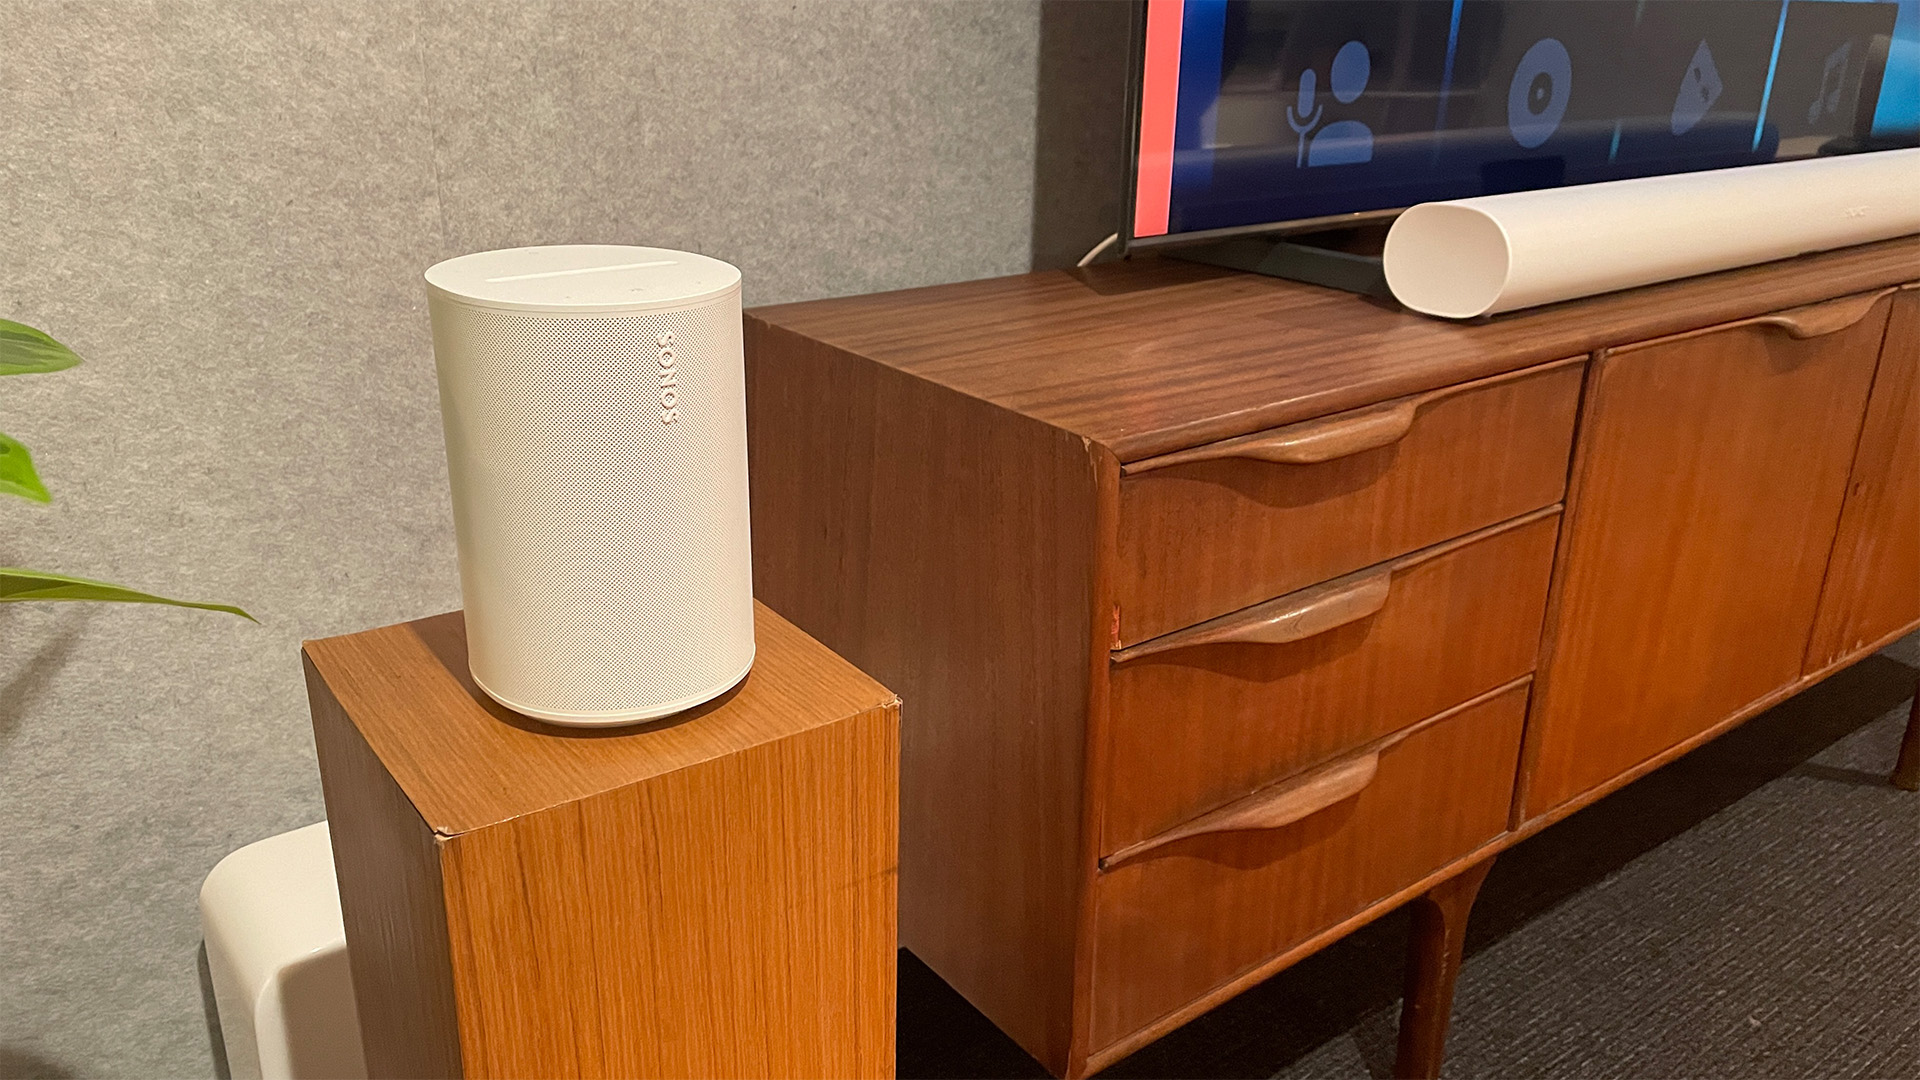 Sonos Era 100 review: a terrific step up in performance and features